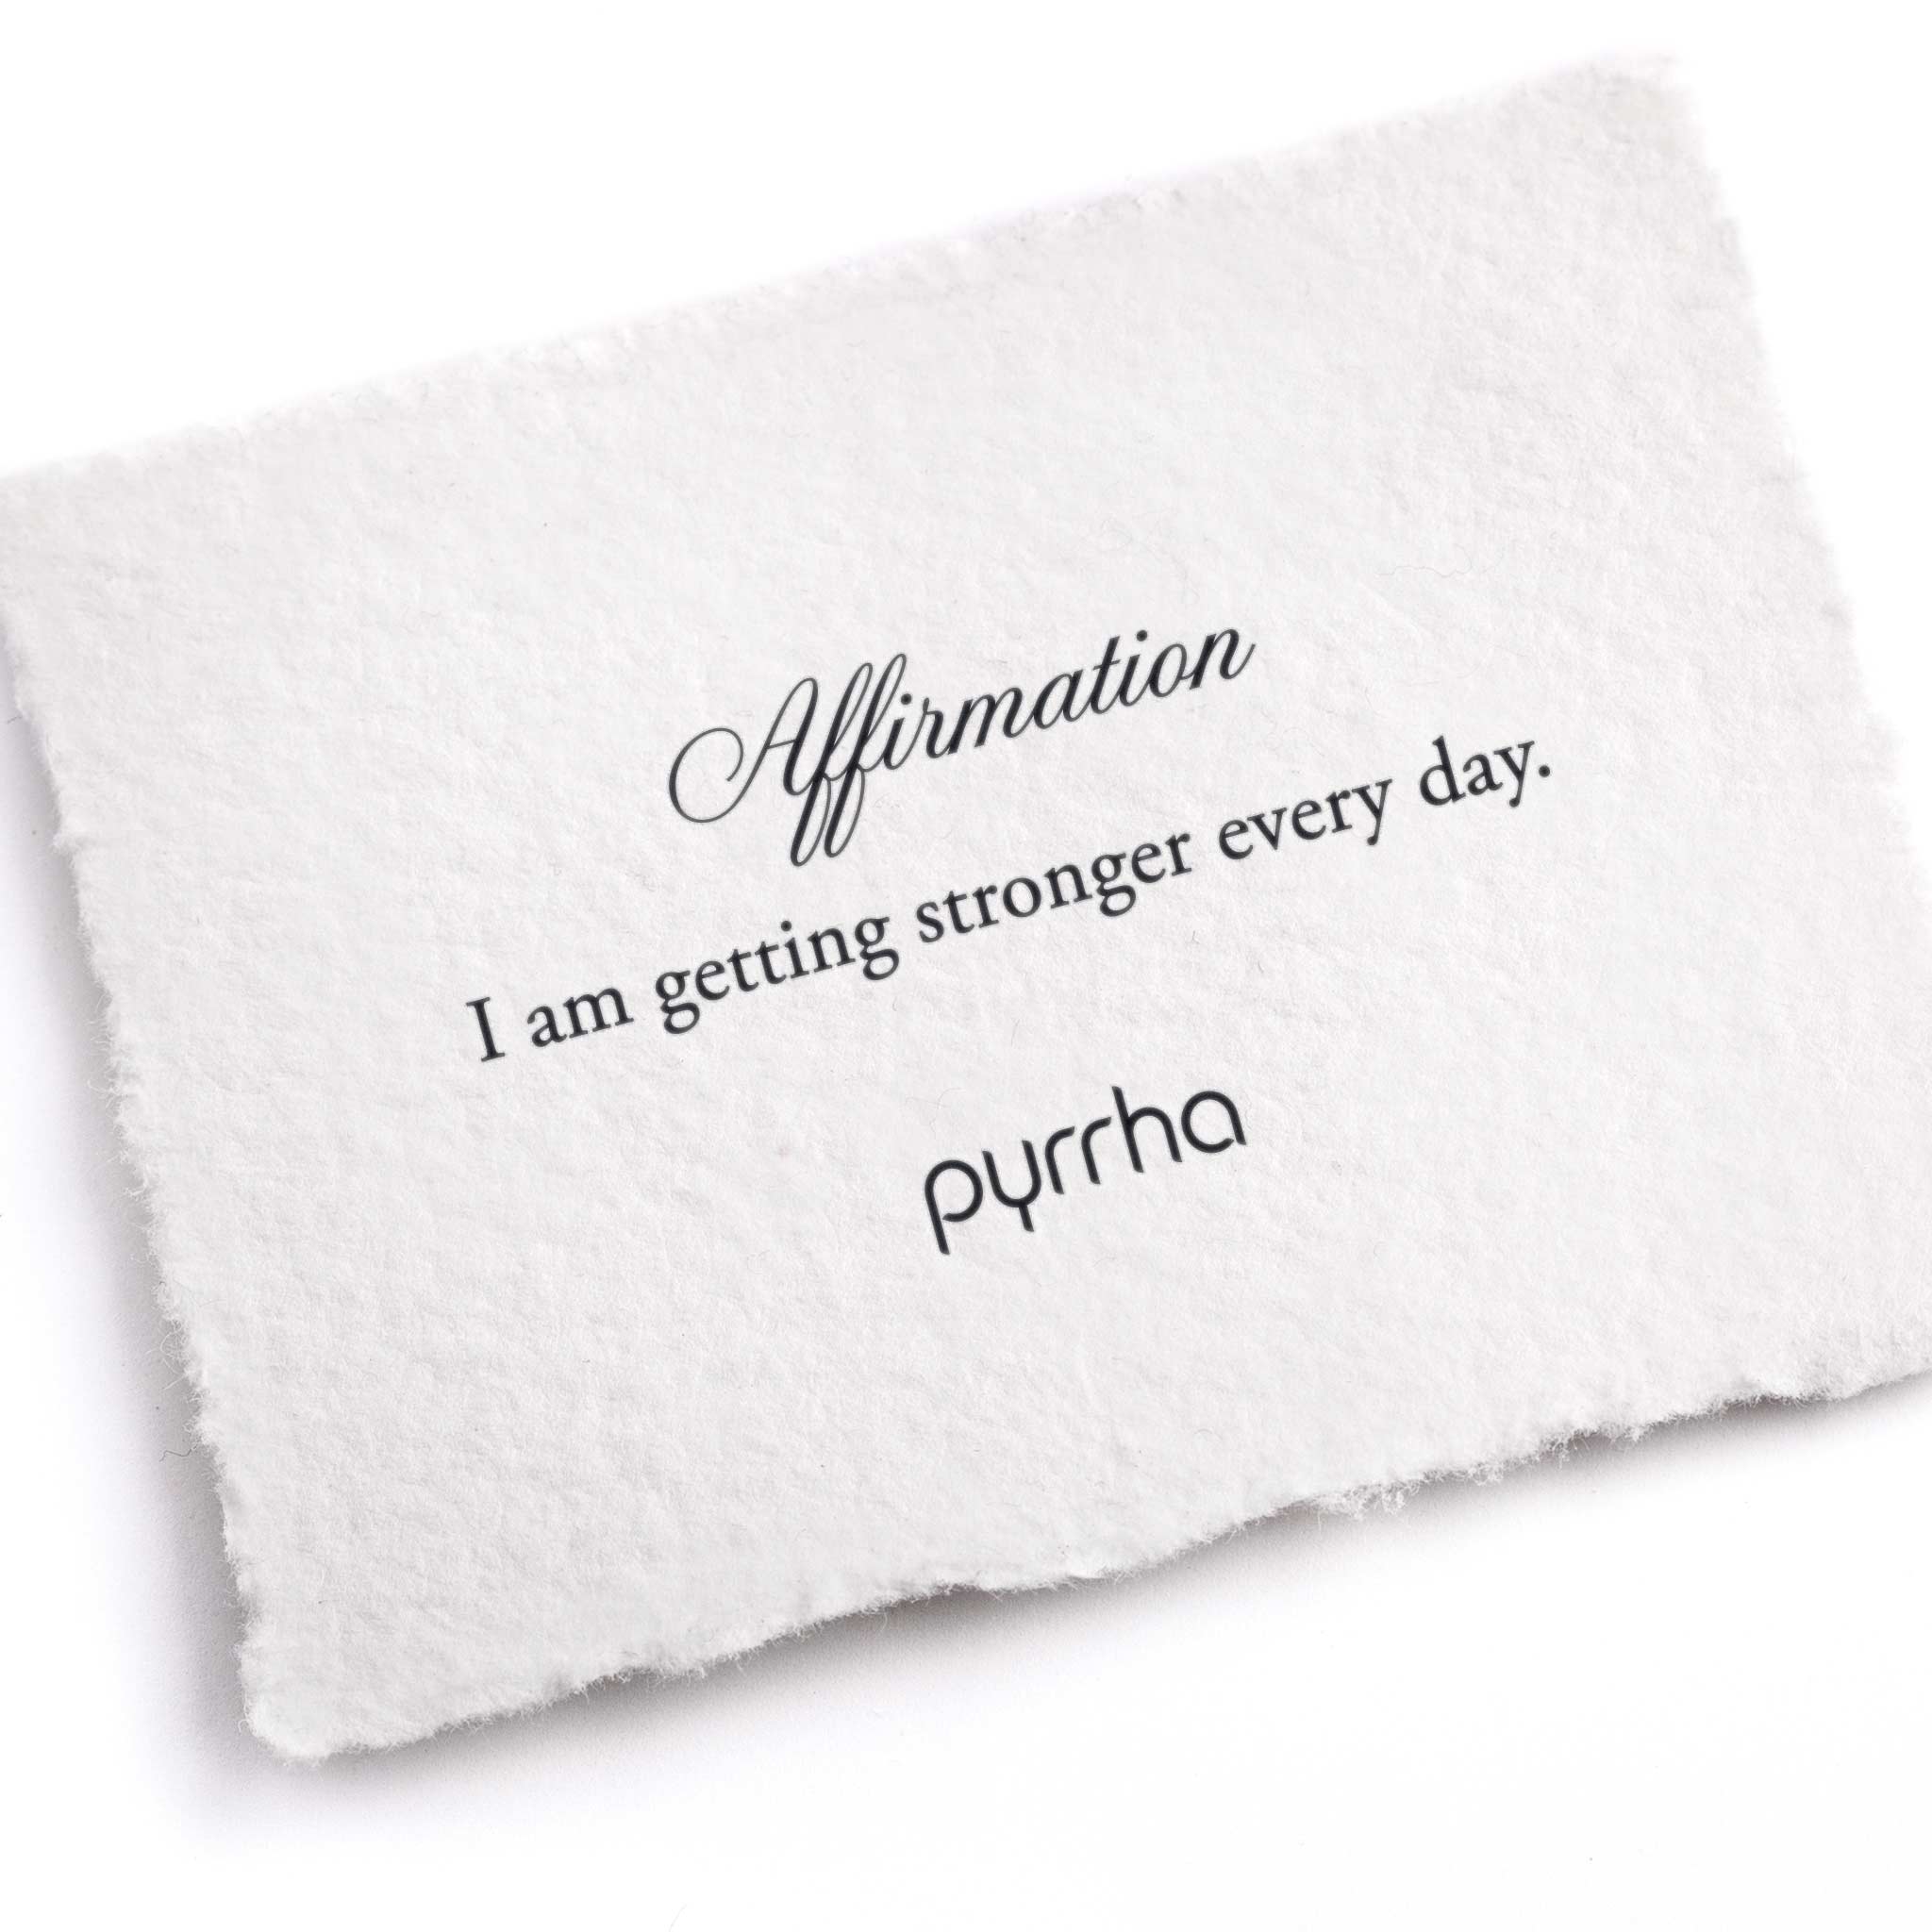 A hand-torn, letterpress printed card describing the meaning for Pyrrha's I Am Getting Stronger Every Day Affirmation Talisman Necklace